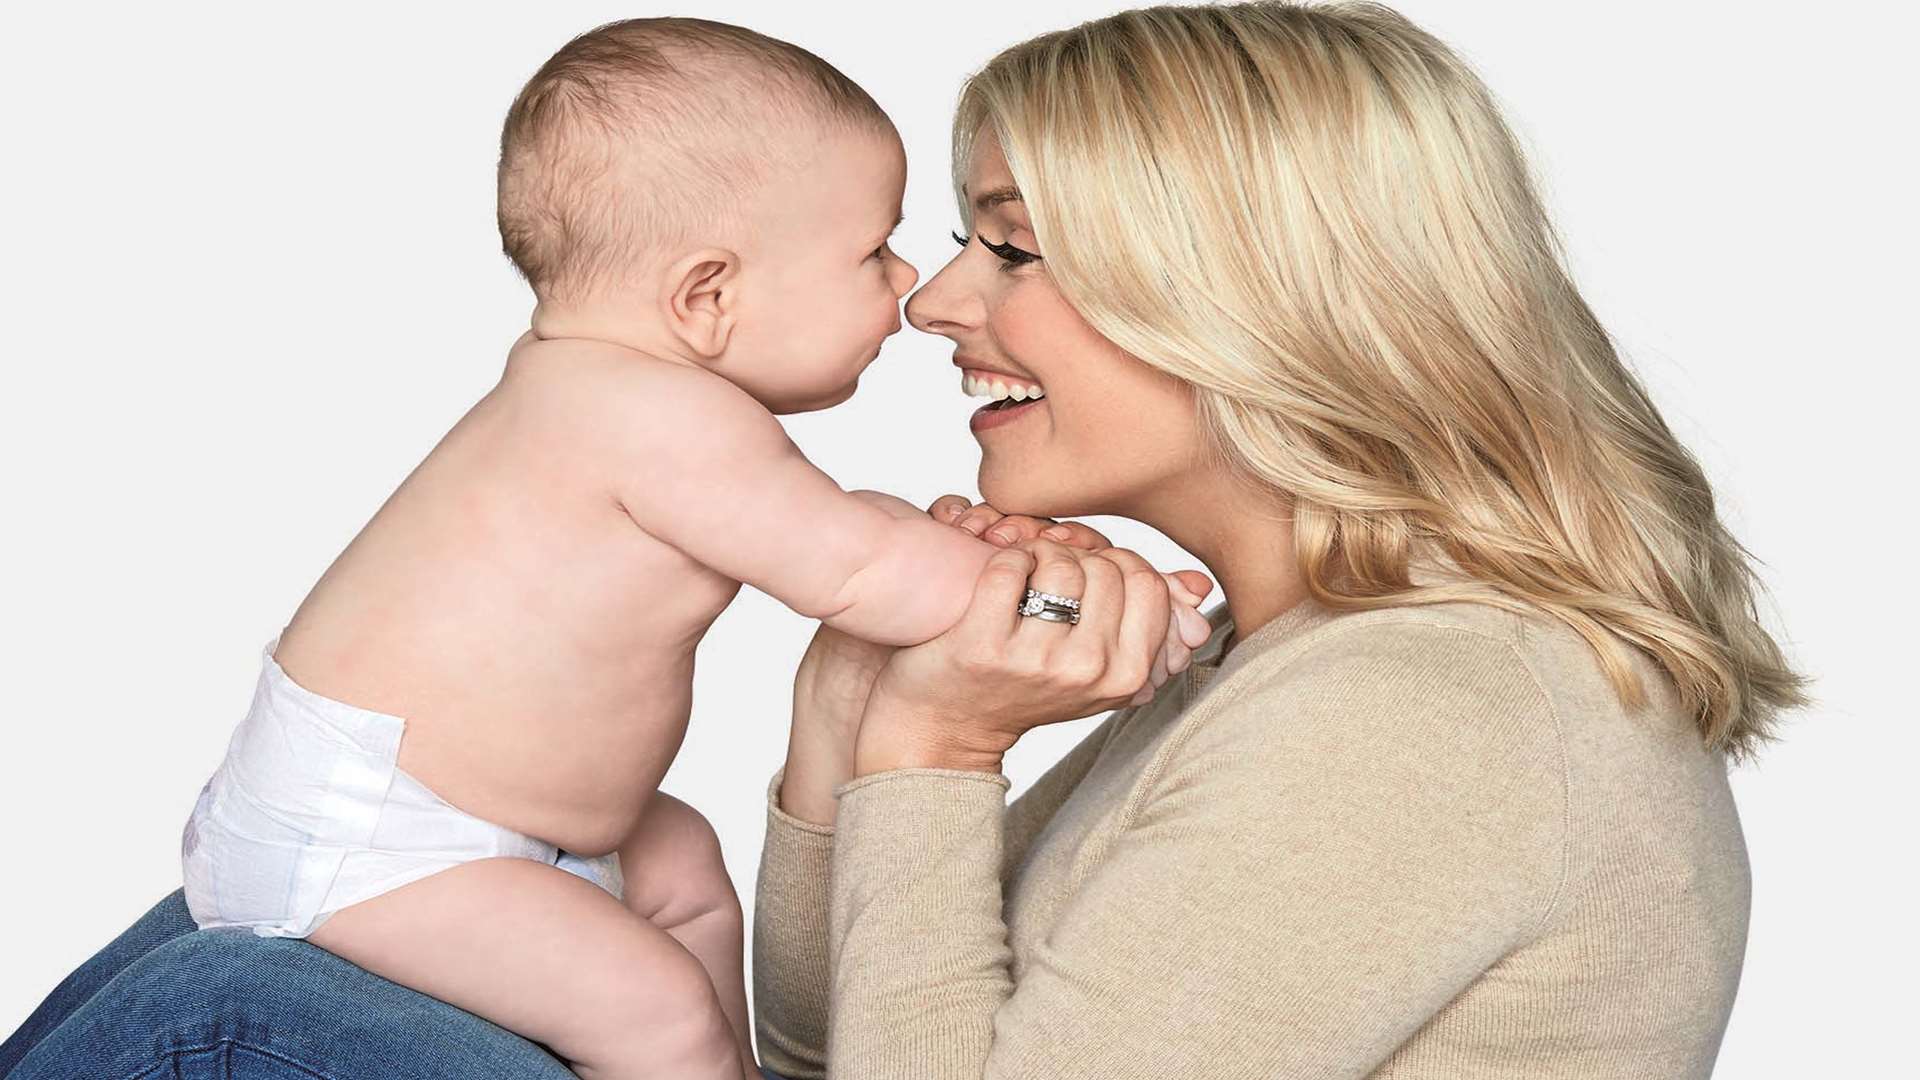 In her book, Holly Willoughby warns mothers to take medical advice before rushing home after the birth.